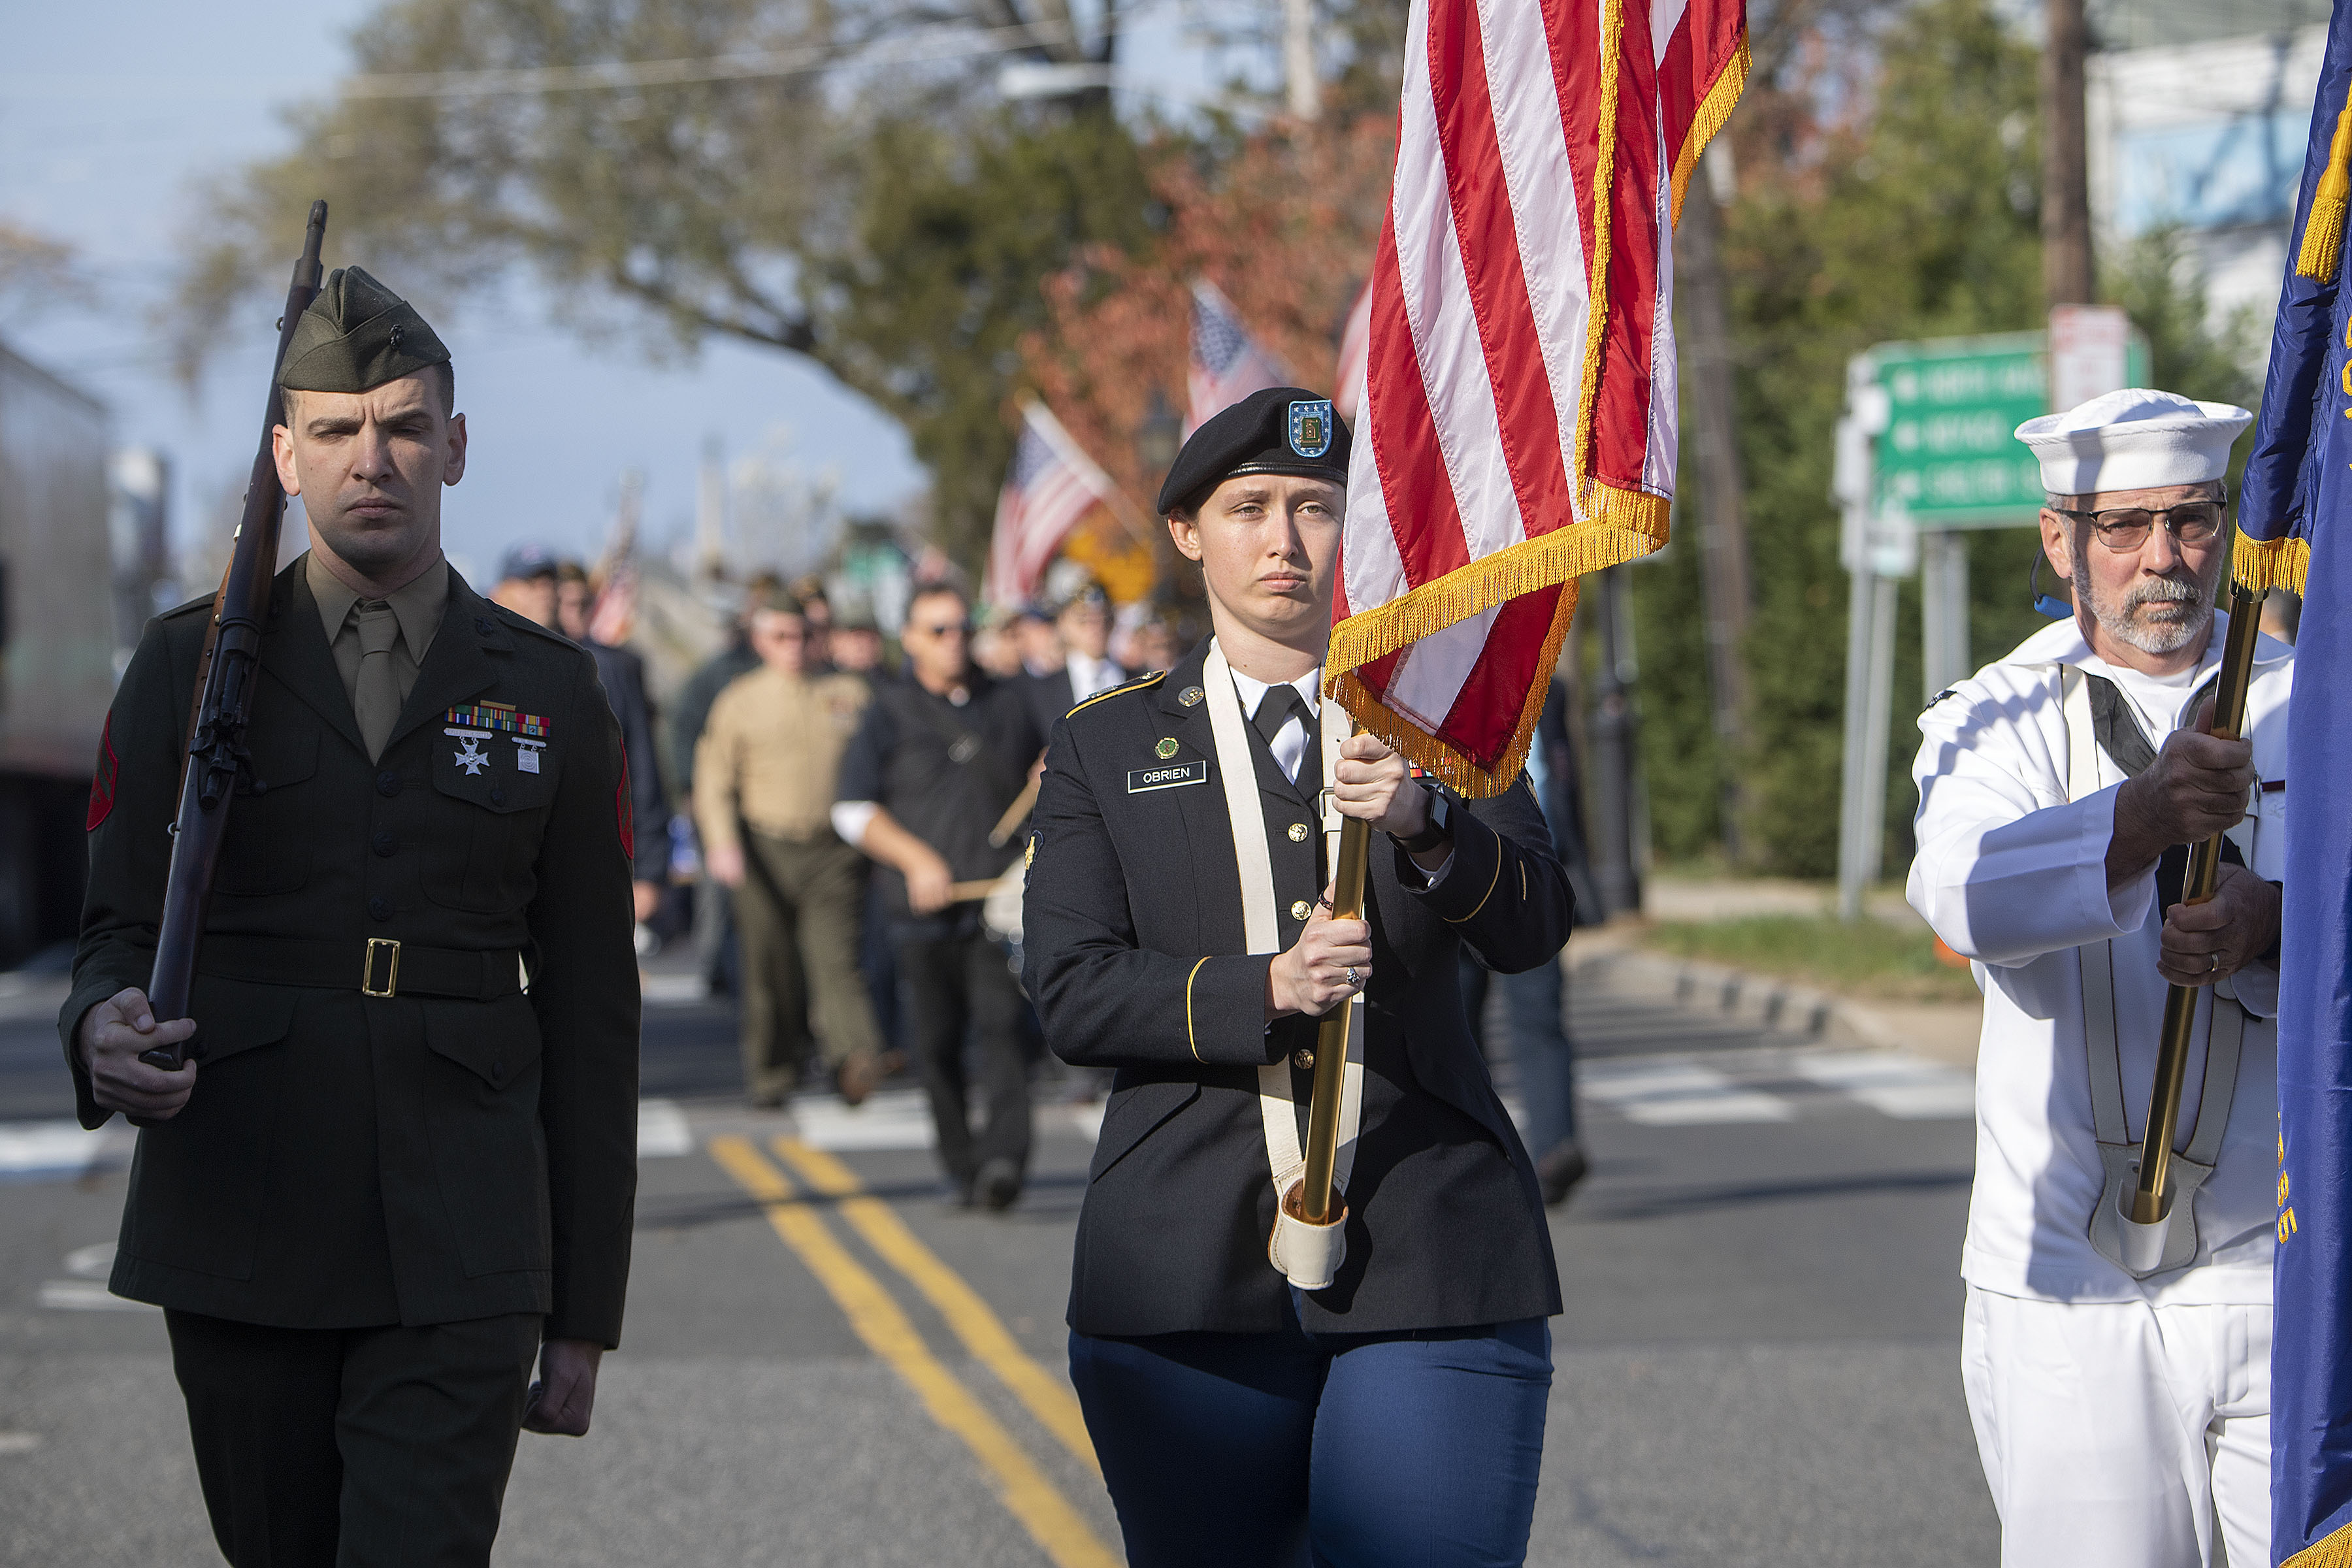 Bonnie O'Brien carries the American flag as Sag Harbor Veterans march down Bay Street during the 2019 Veterans Day Parade on Monday. MICHAEL HELLER